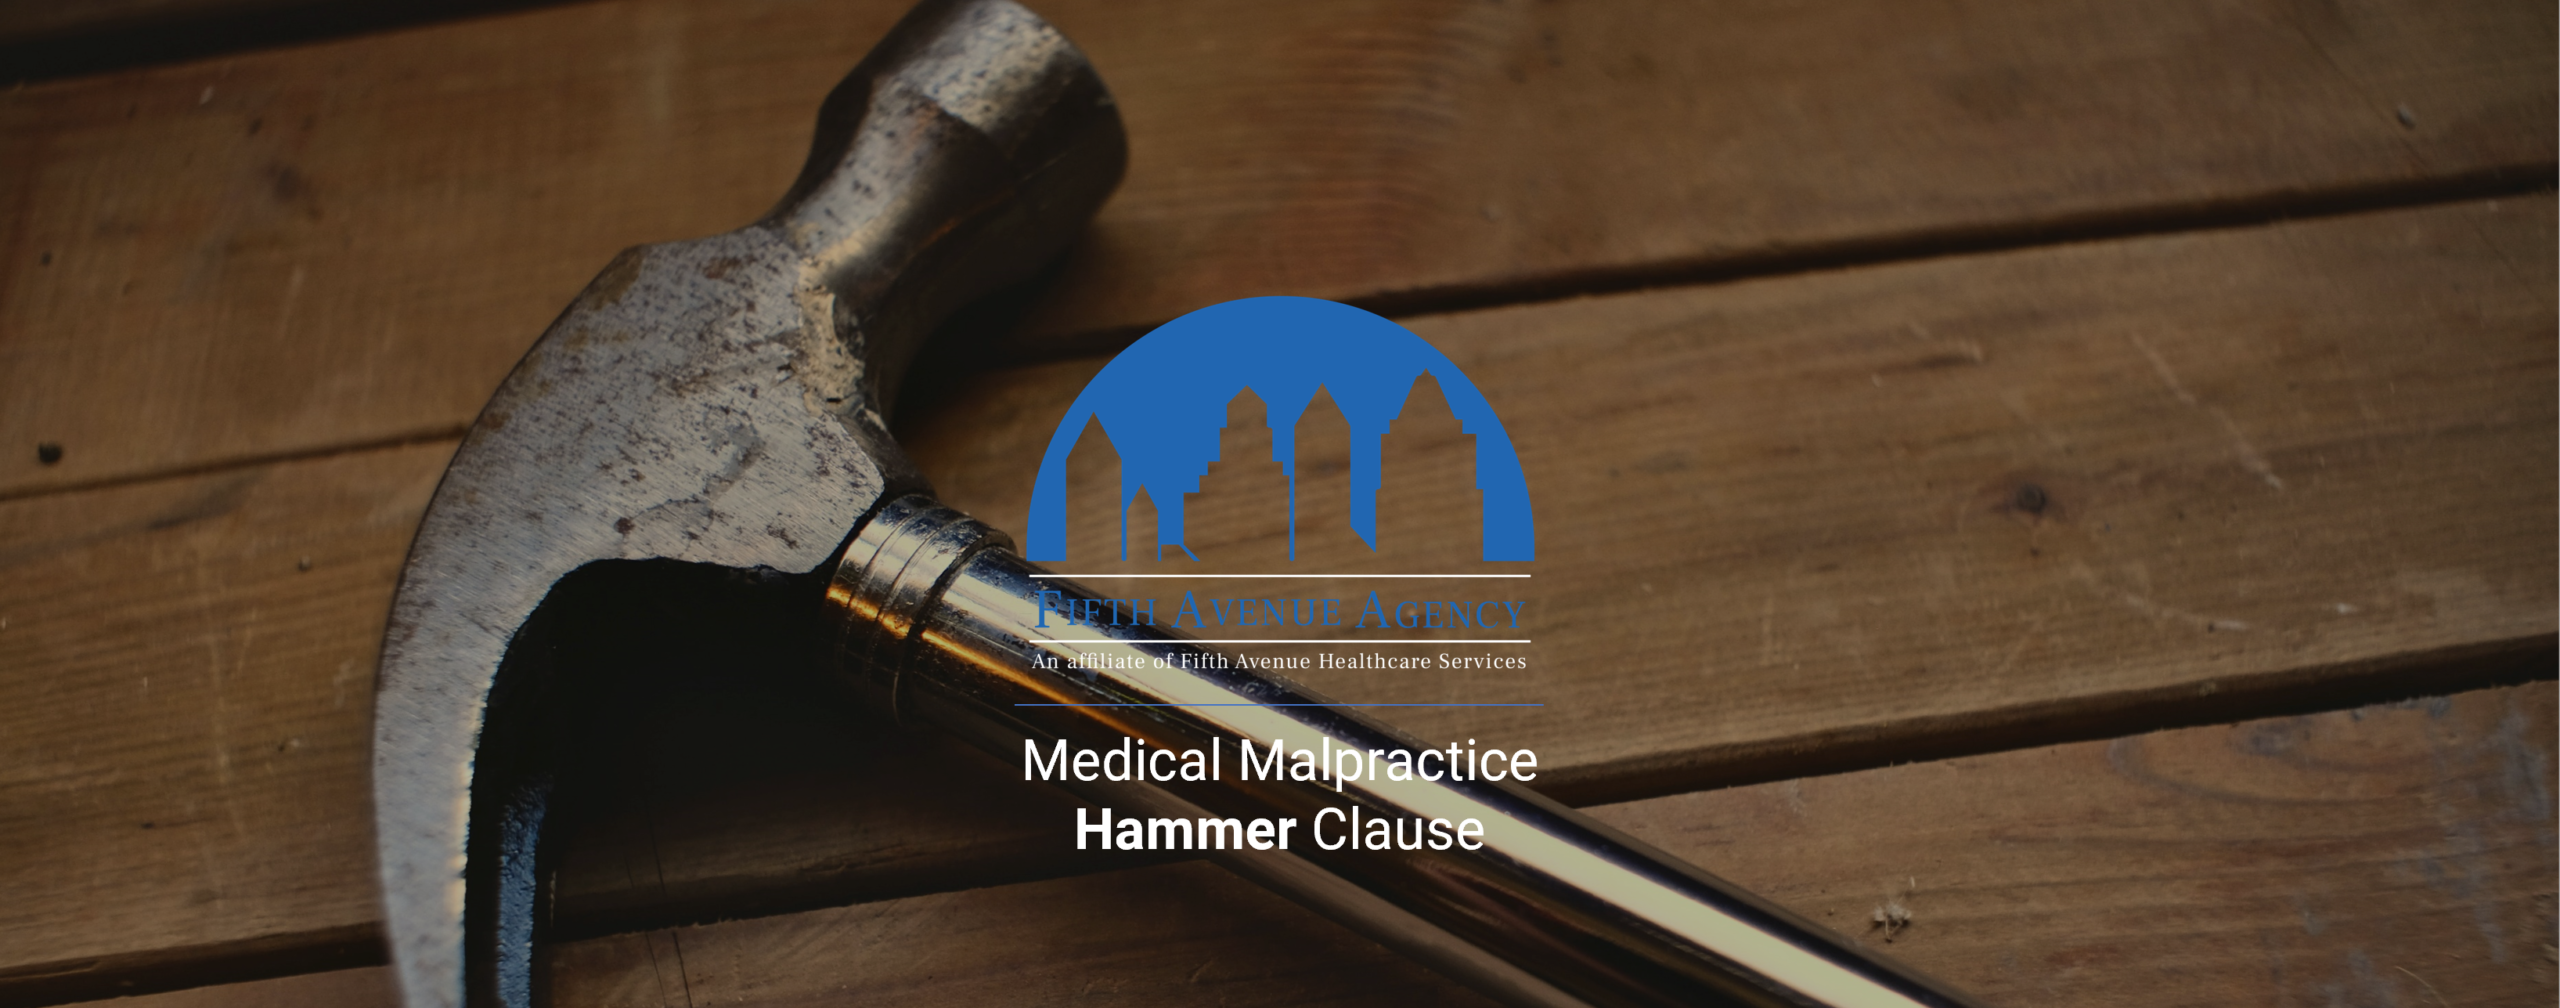 Hammer Clause In Medical Malpractice